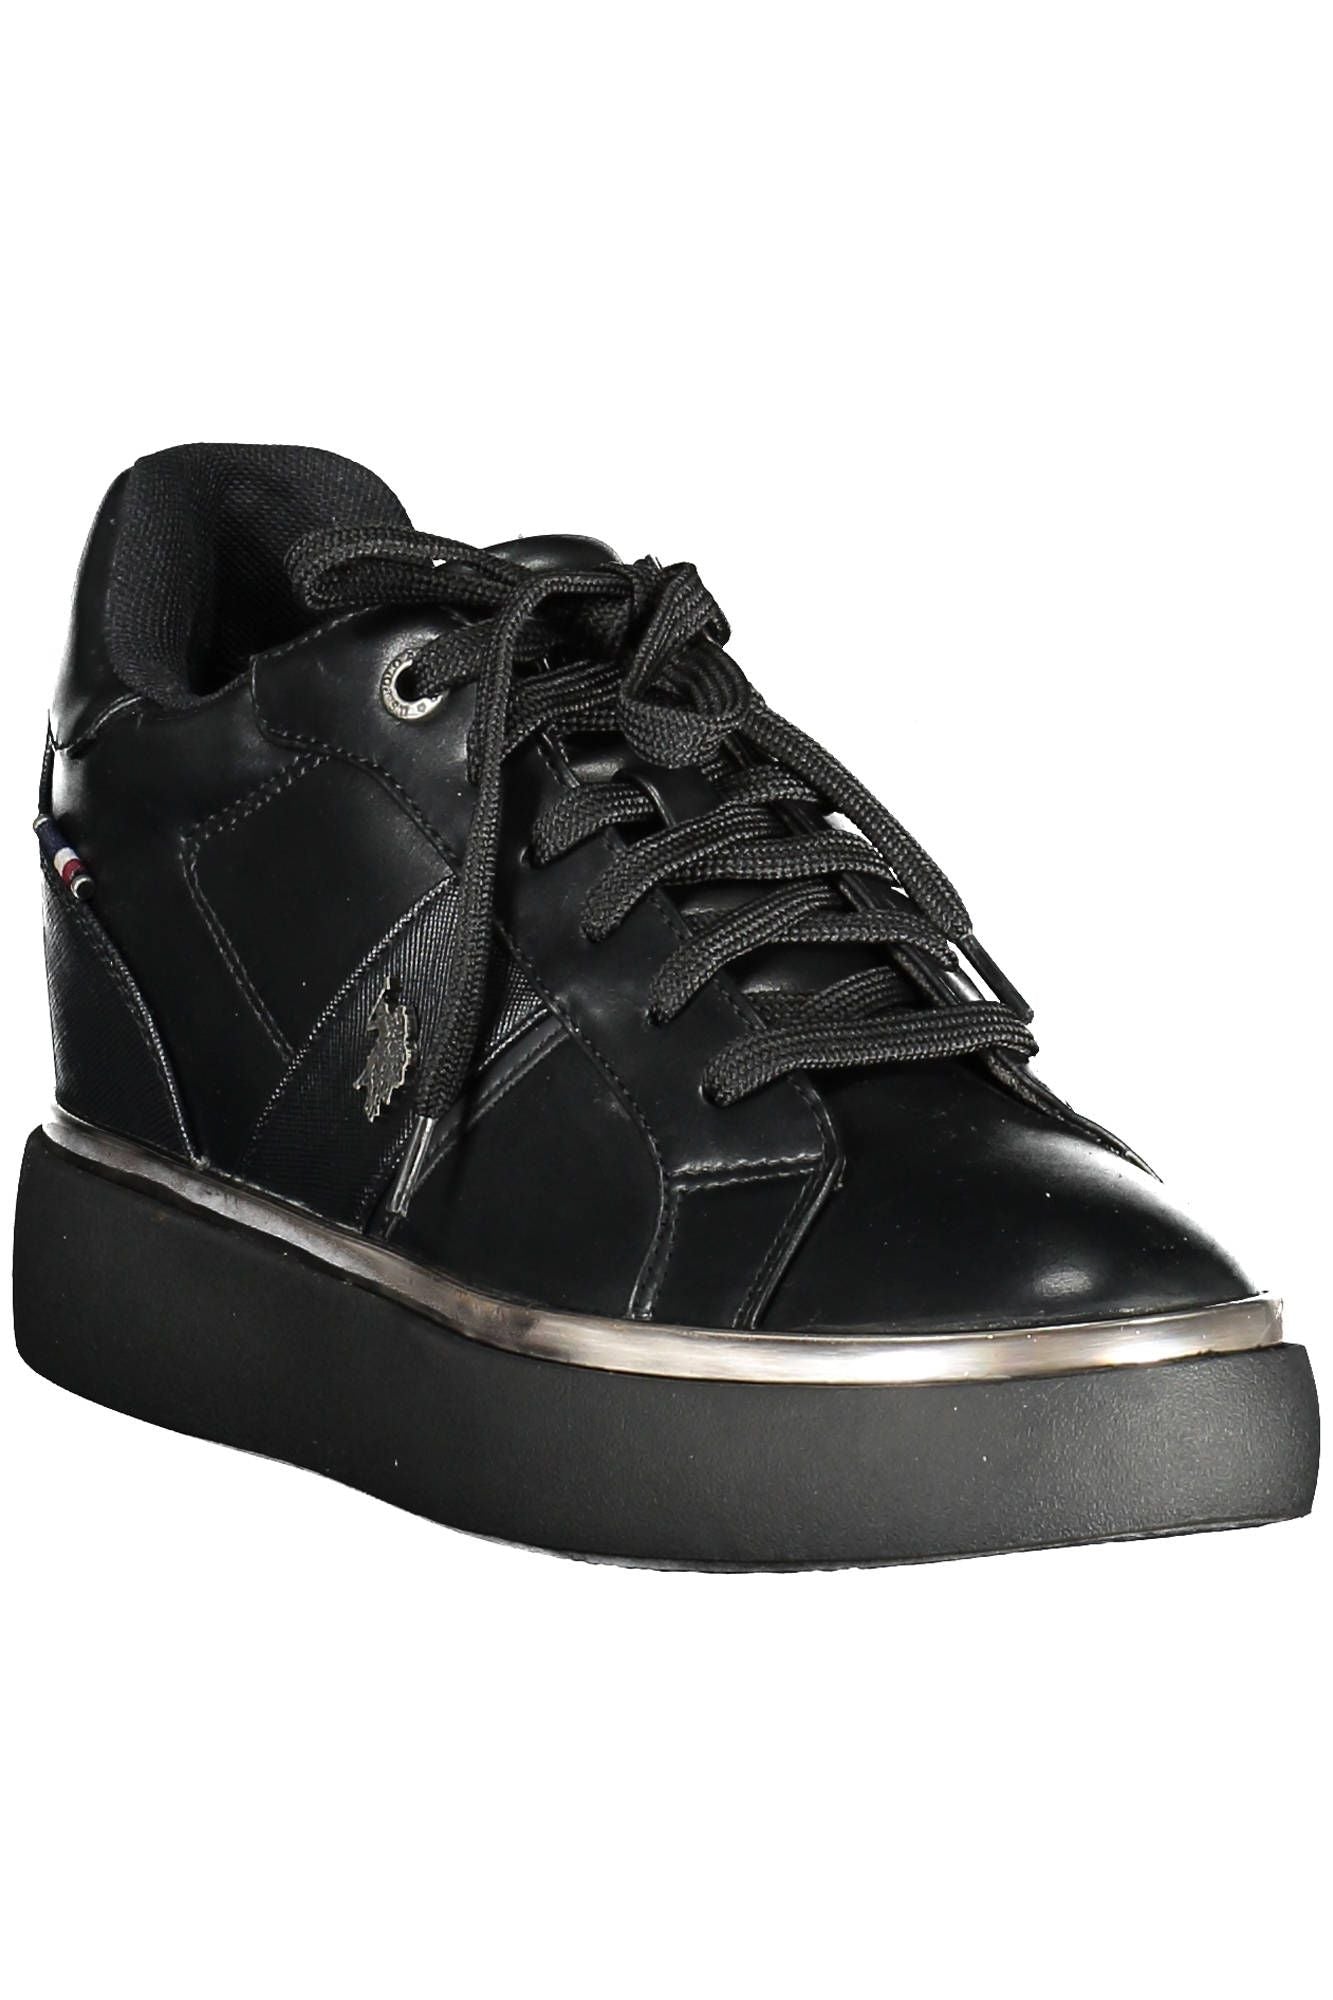 U.S. POLO ASSN. Chic Black Lace-Up Sneakers with Logo Detail